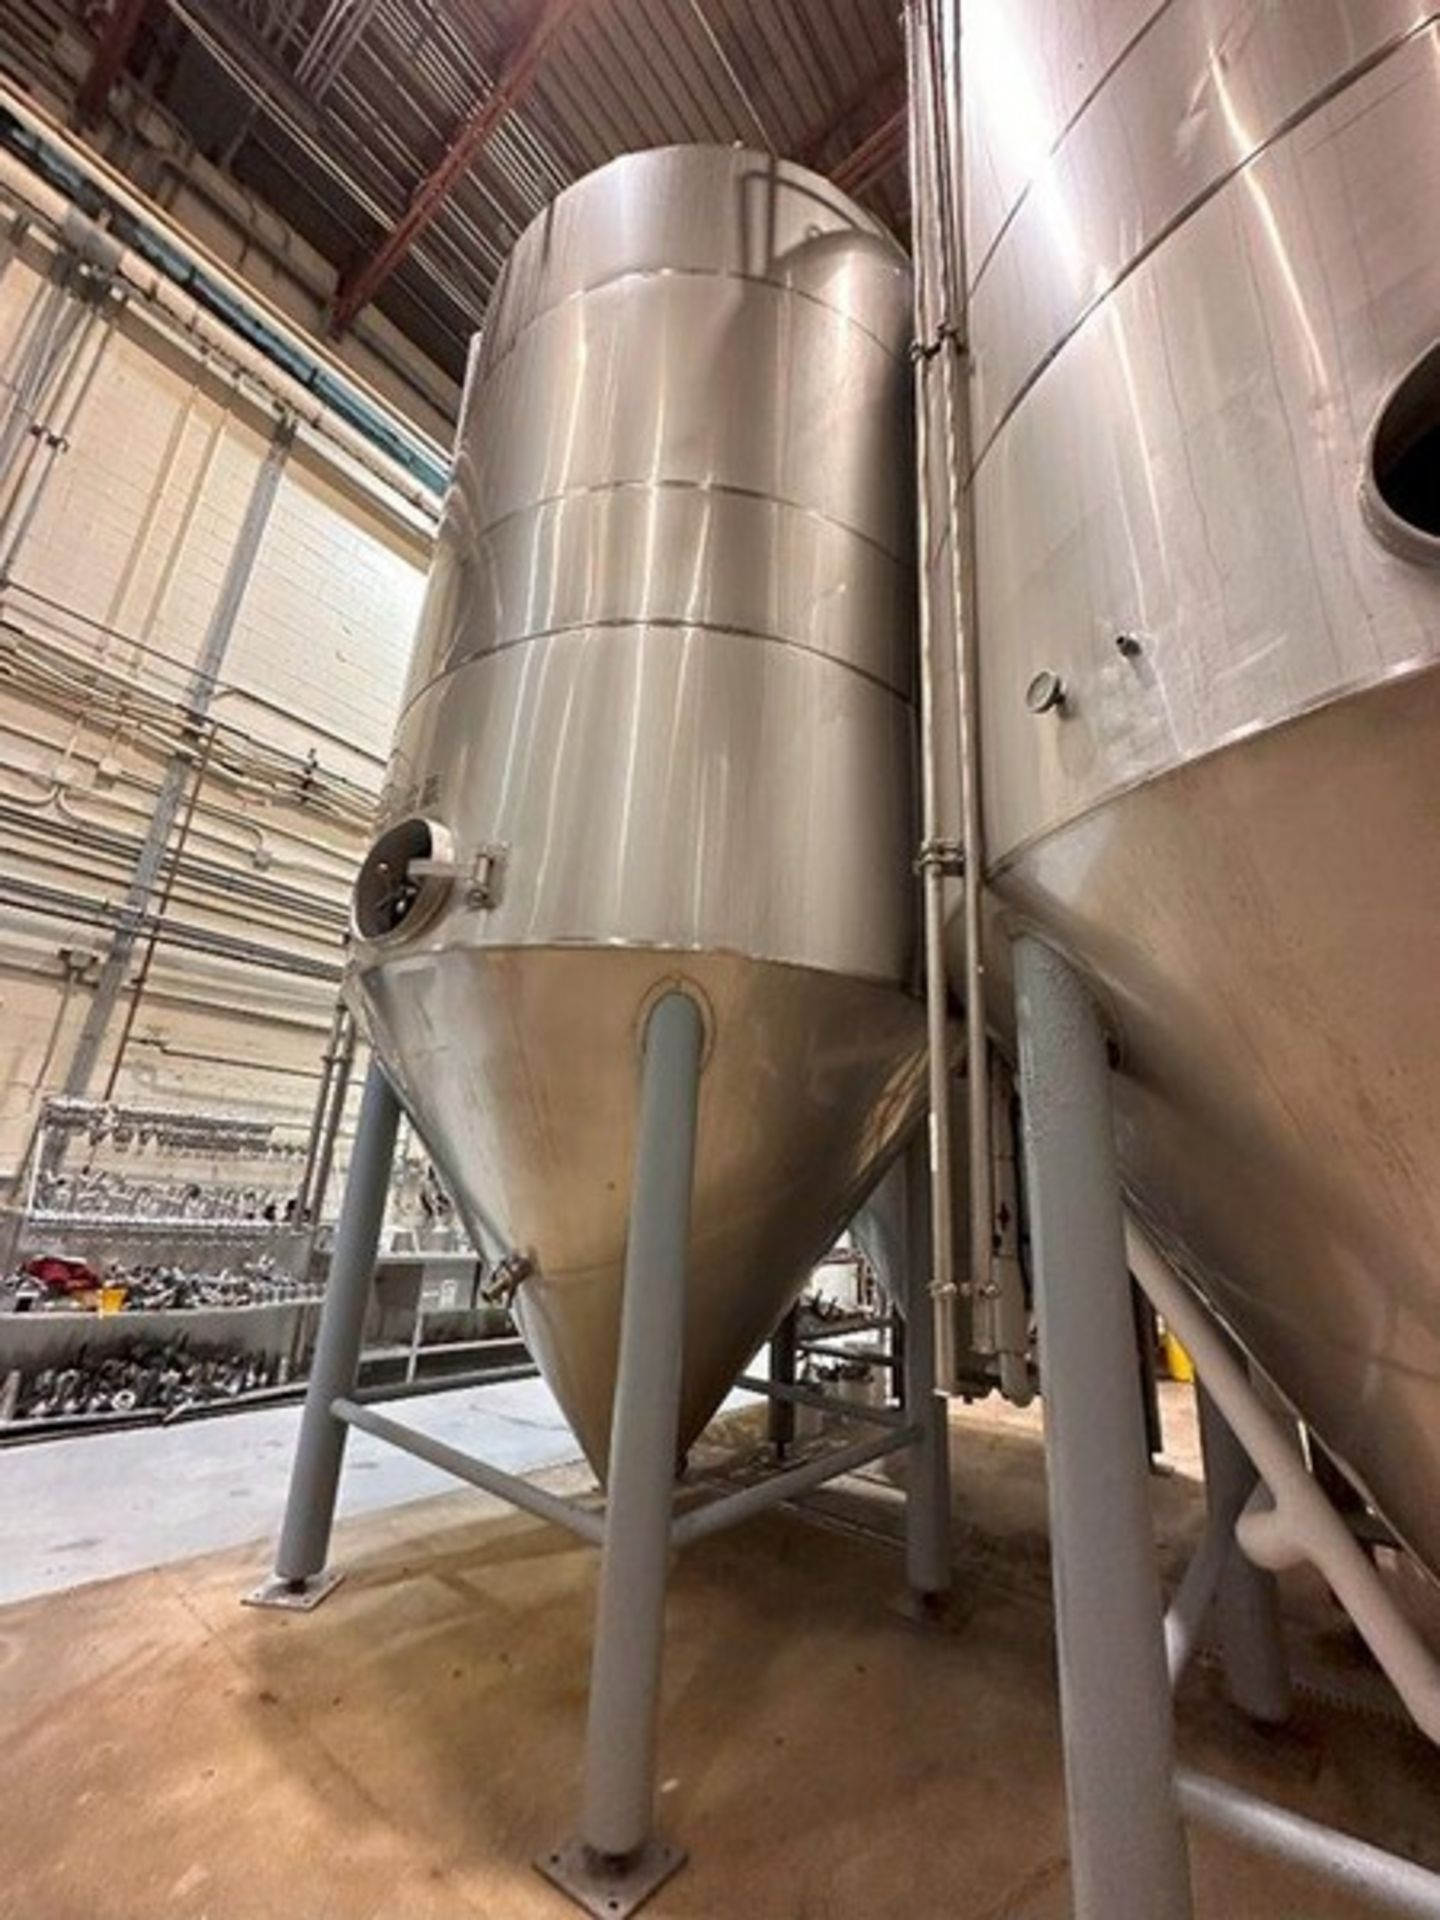 150 BBL (4650 Gallon) Vertical Cone Bottom 304 Stainless Steel Jacketed Vessel. Manufactured by Sant - Bild 5 aus 9